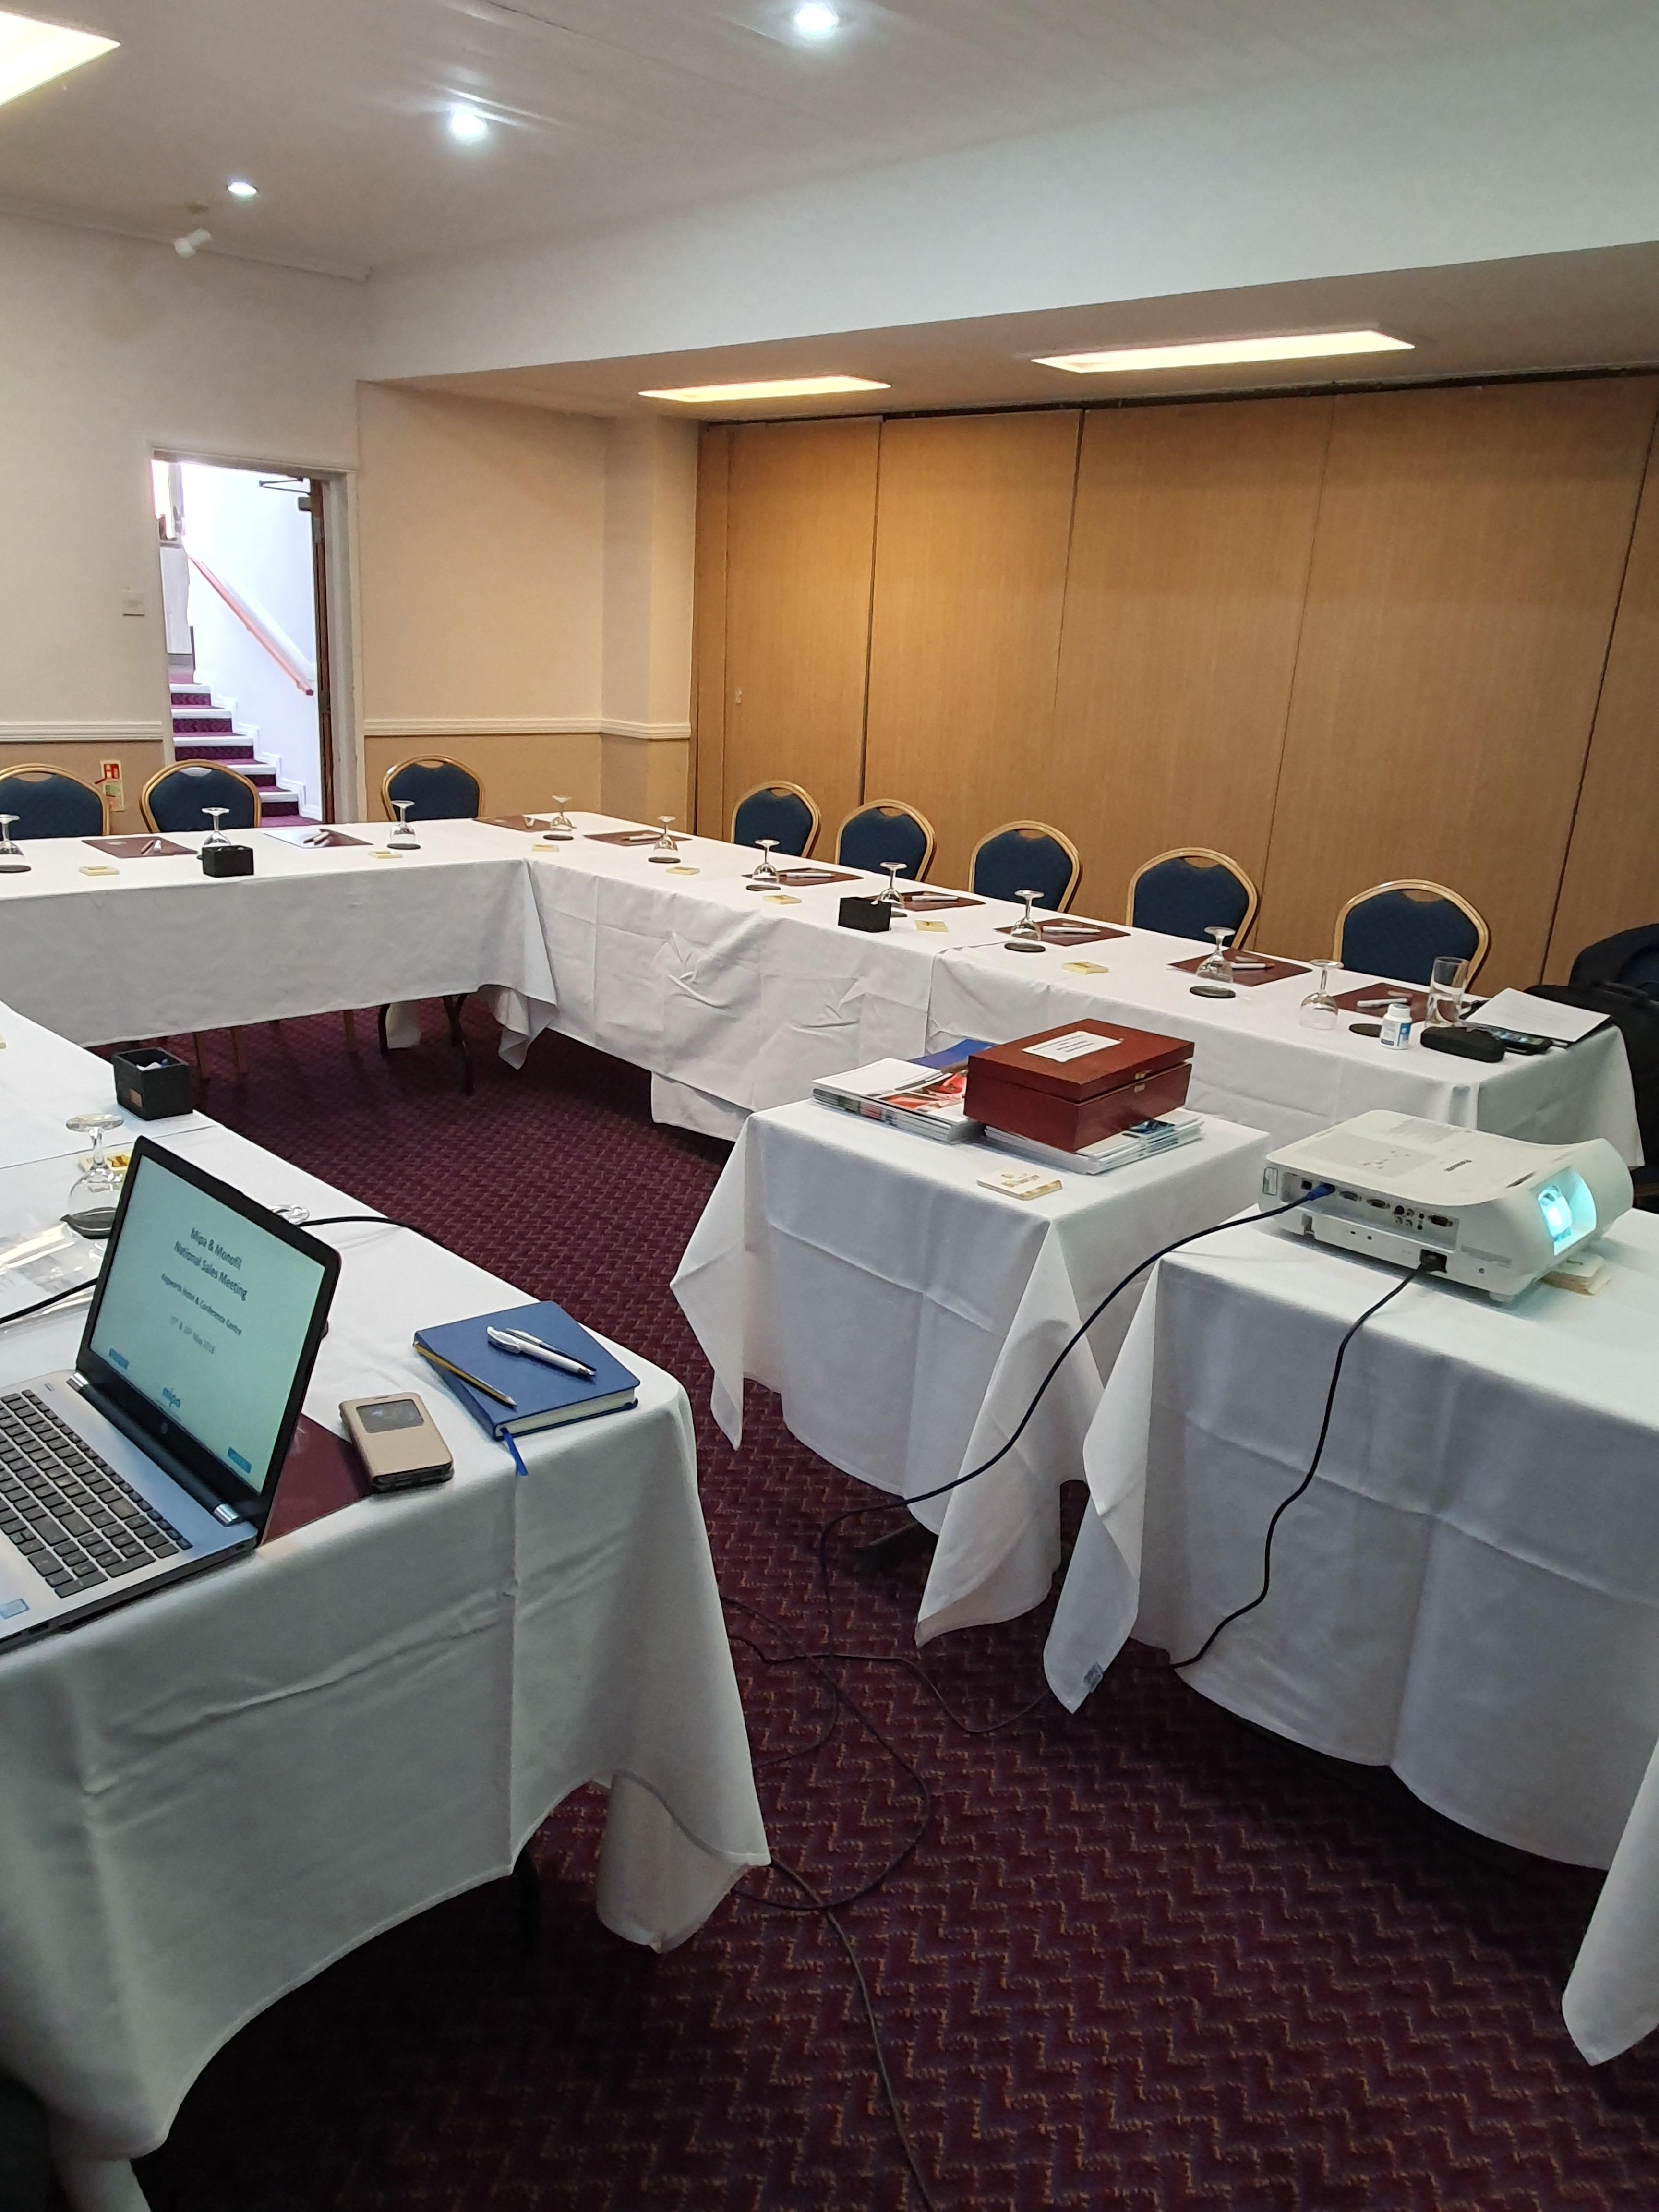 Thinkference, Kegworth Hotel & Conference Centre photo #1